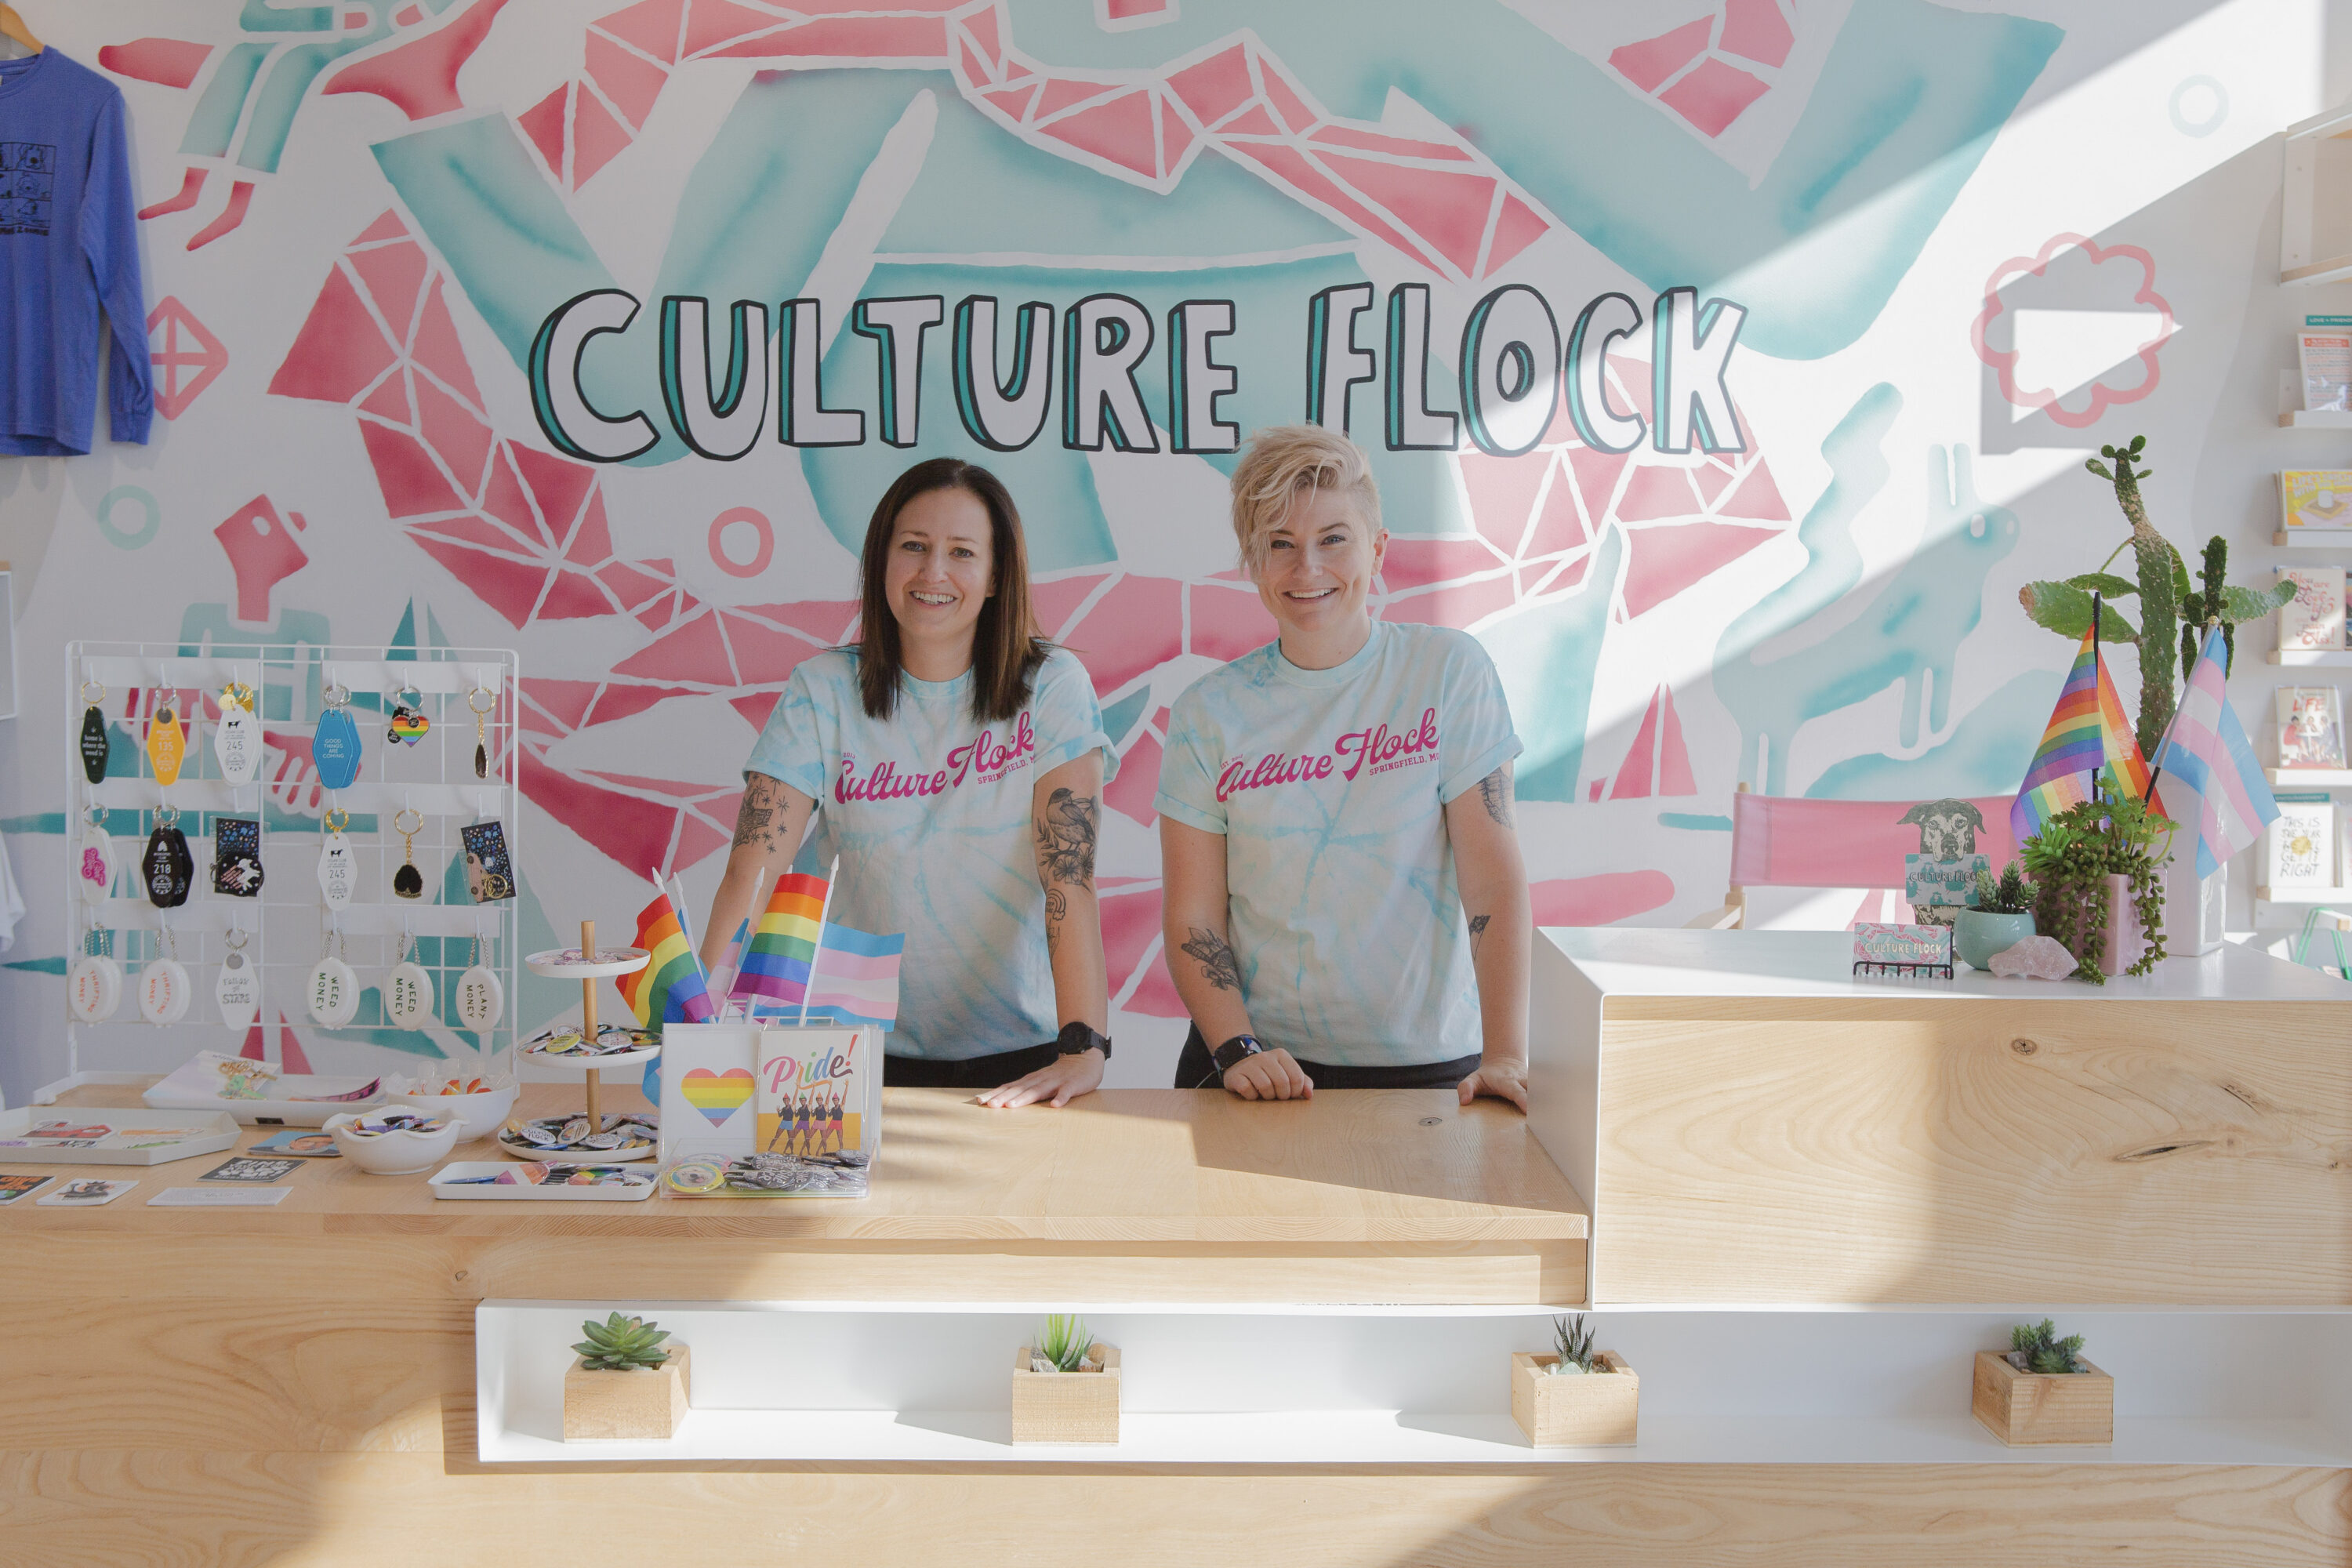 Two light-skinned women stand behind the light-wood counter of a modern retail space. They wear light-blue tie-dyed T-shirts that say "Culture Flock" in bright pink cursive lettering. Both women have tattoos on each arm. They smile brightly. Behind them, "Culture Flock" is written in big, illustrated bubble letters on the wall against a light blue and pink geometric background. On the counter, a display of colorful keychains, pride flags, and colorful cards and pins are arranged.